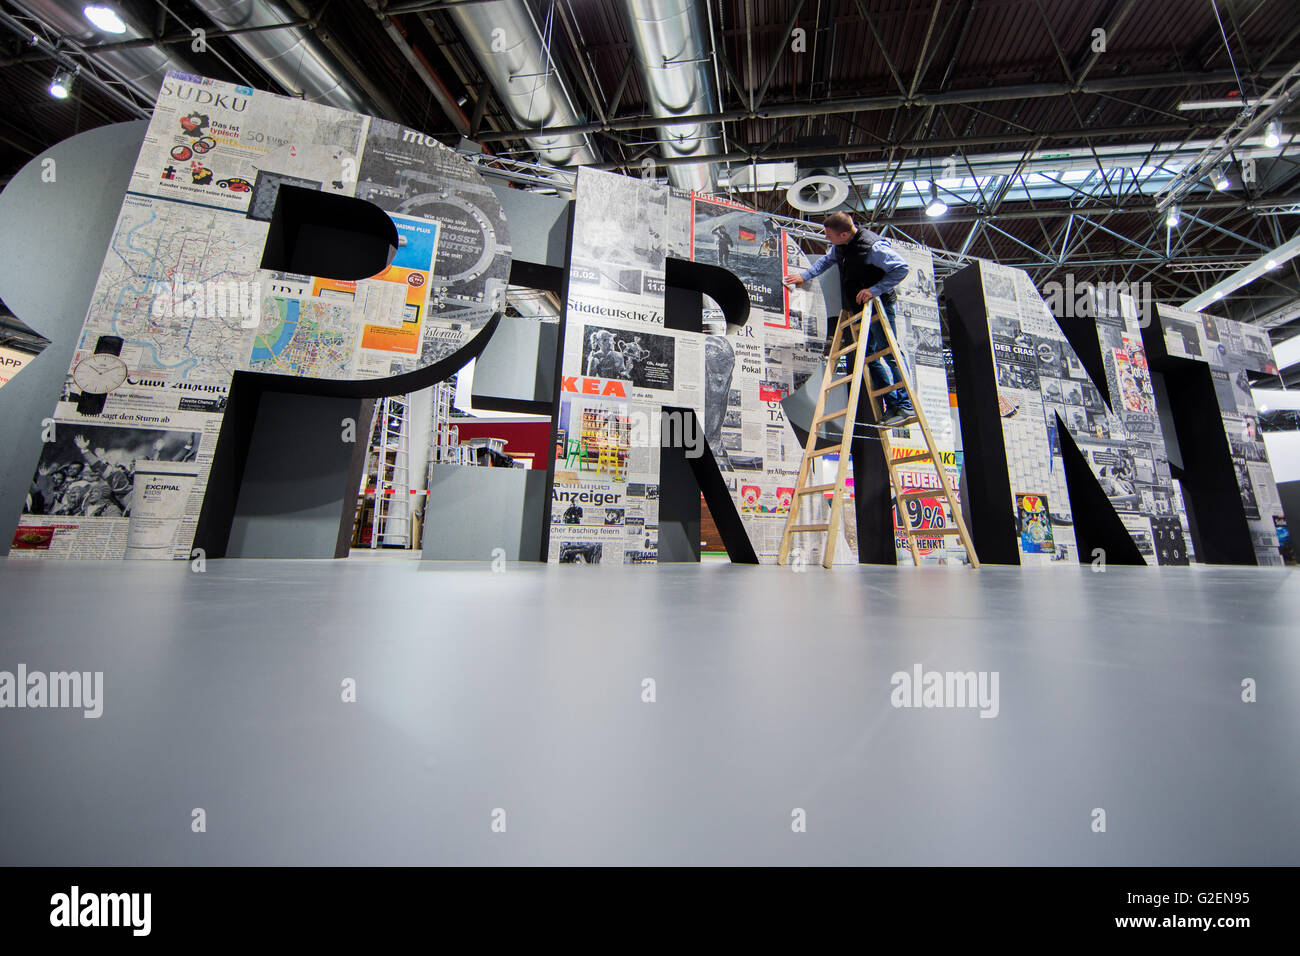 Duesseldorf, Germany. 30th May, 2016. The word 'Print' can be read in oversized letters during a photo tour of the 'Drupa' print media fair in Duesseldorf, Germany, 30 May 2016. Drupa, the world's largest trade fair for print media, takes place from 31 May until 10 June 2016 in Duesseldorf. Photo: ROLF VENNENBERND/dpa/Alamy Live News Stock Photo